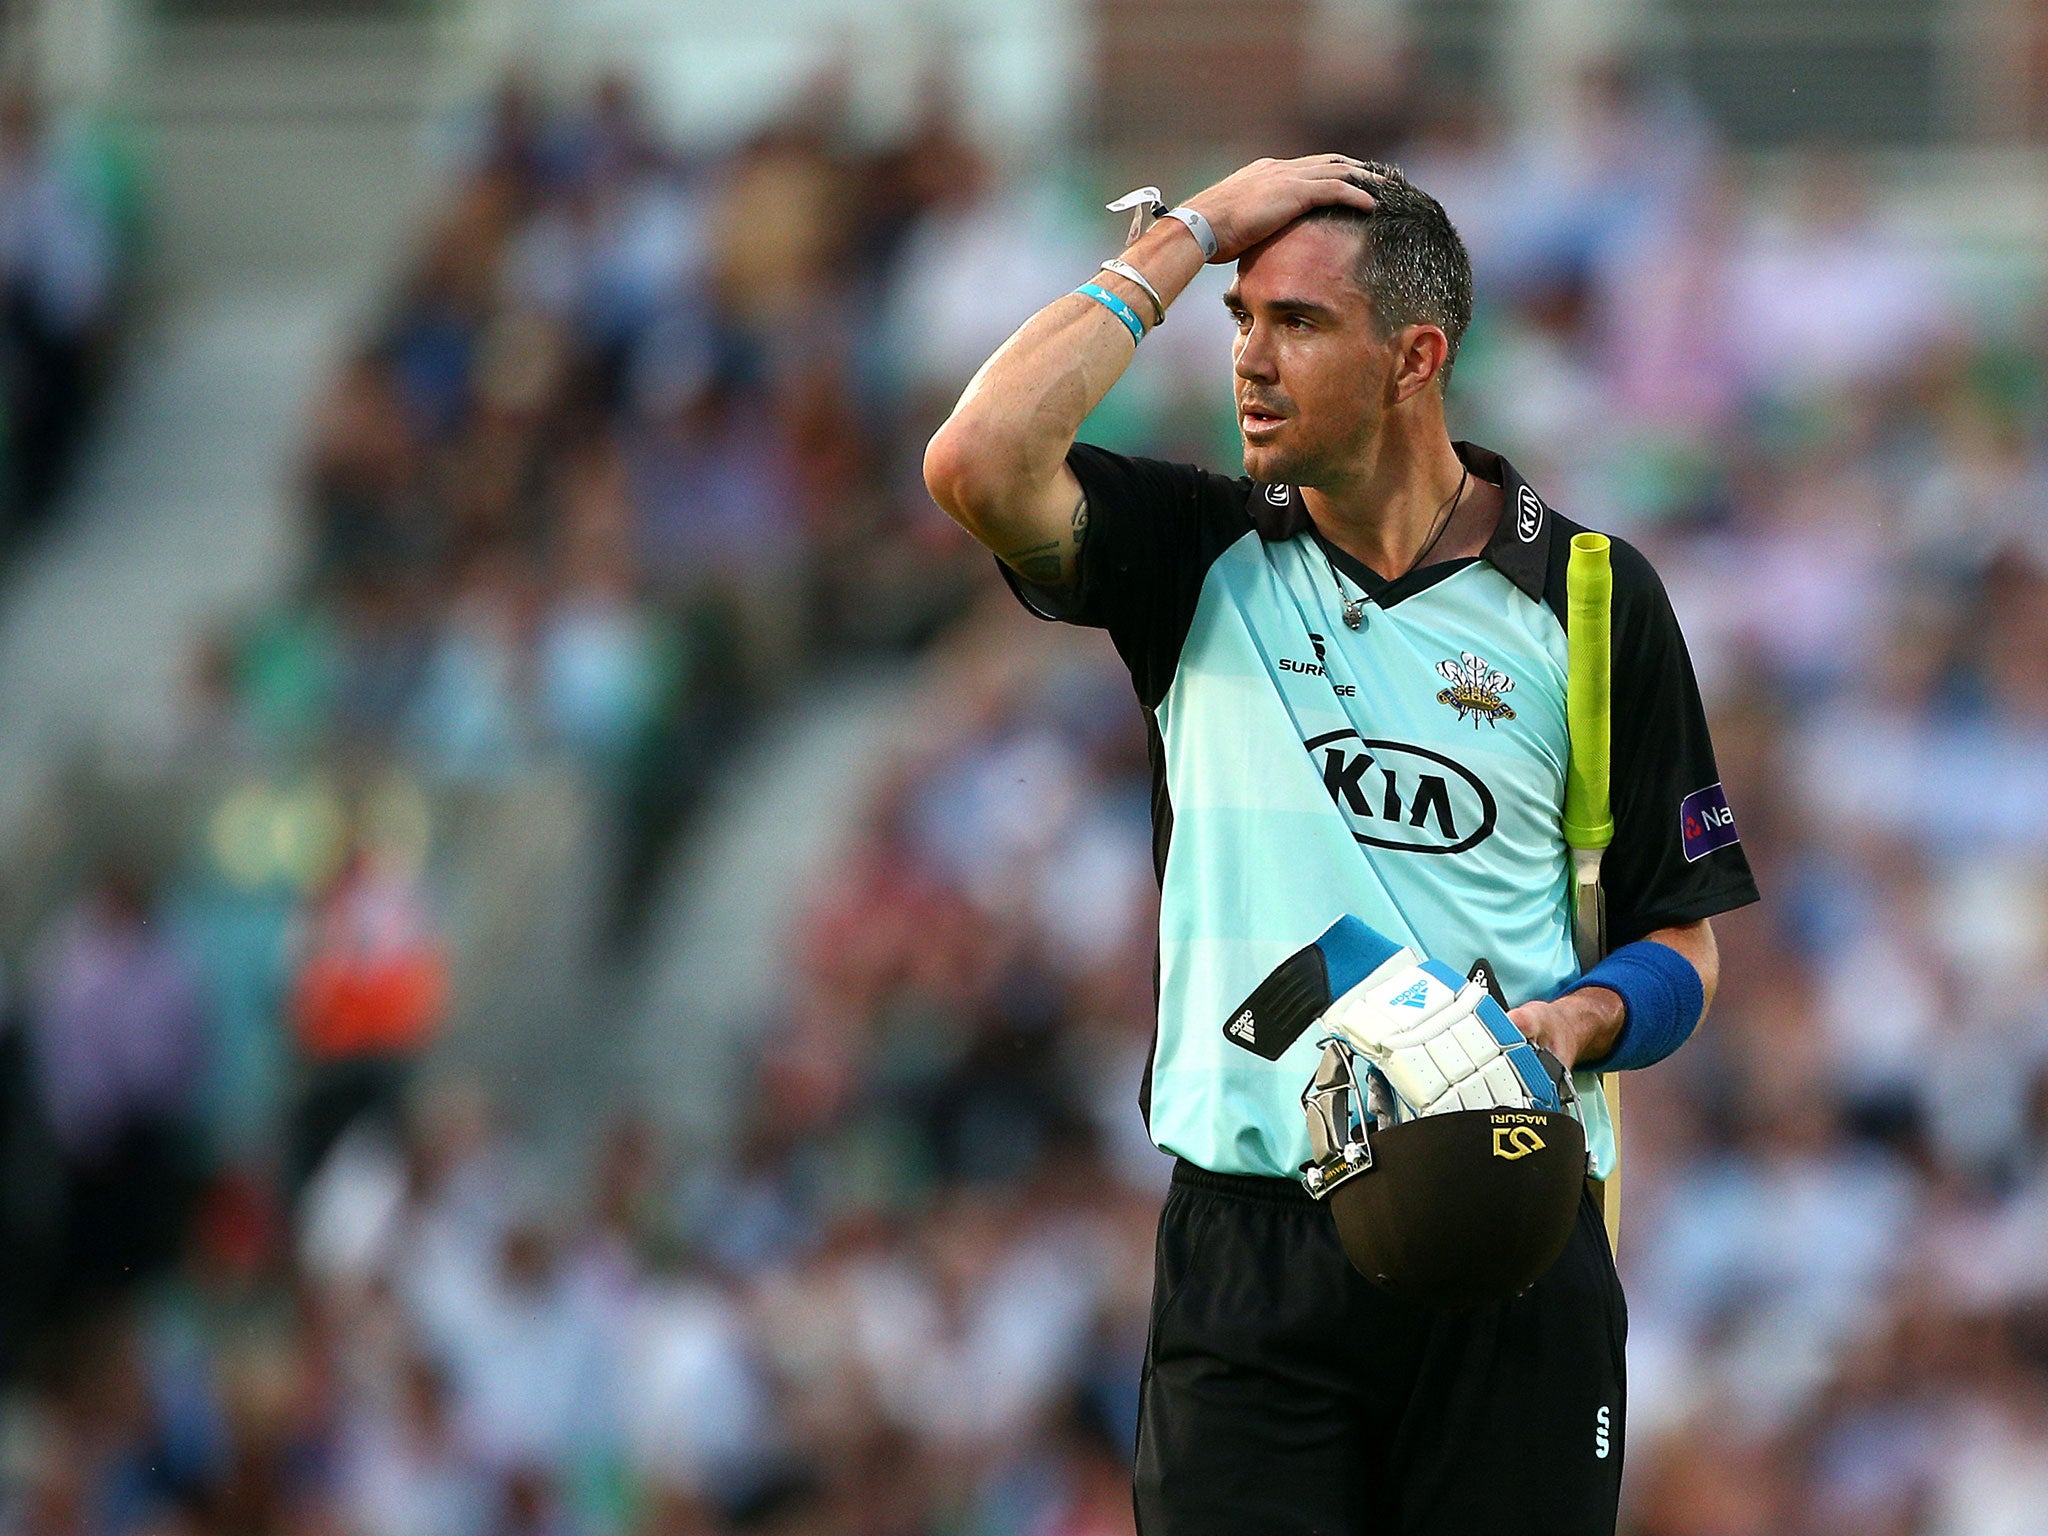 Kevin Pietersen walks off the pitch for Surrey after being dismissed